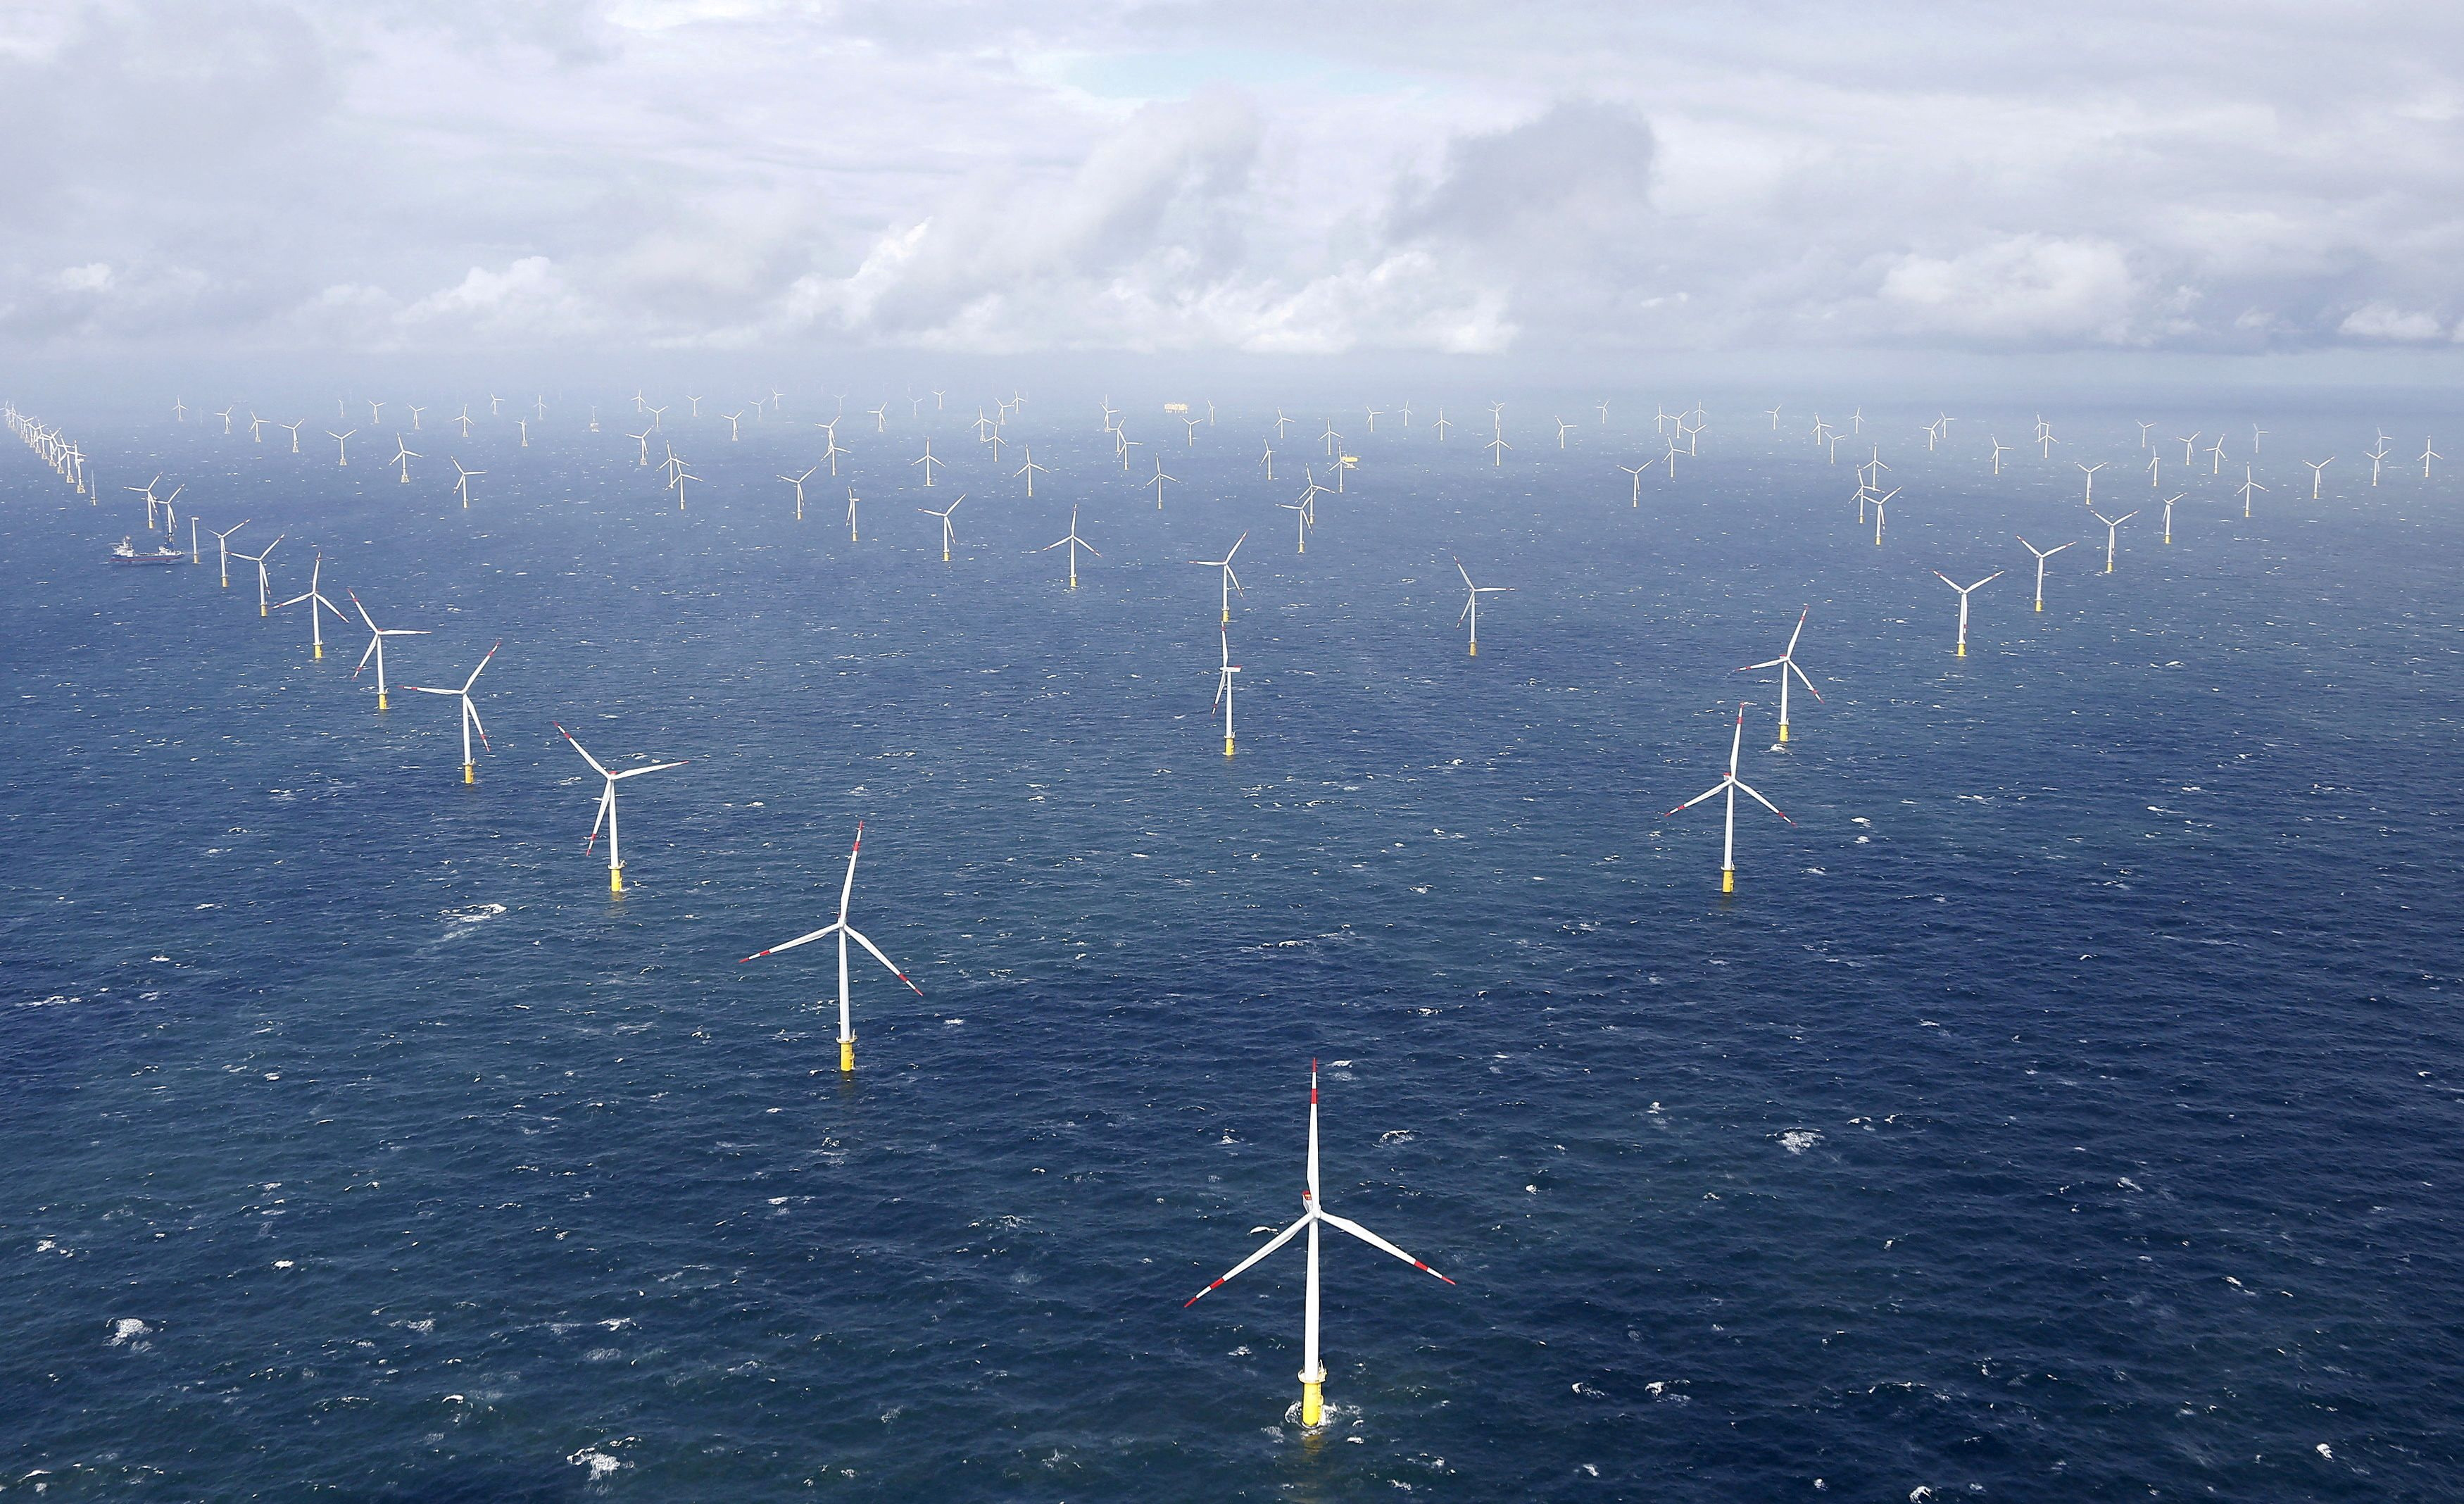 Power-generating windmill turbines are pictured at the 'Amrumbank West' offshore windpark in the northern sea near the island of Amrum